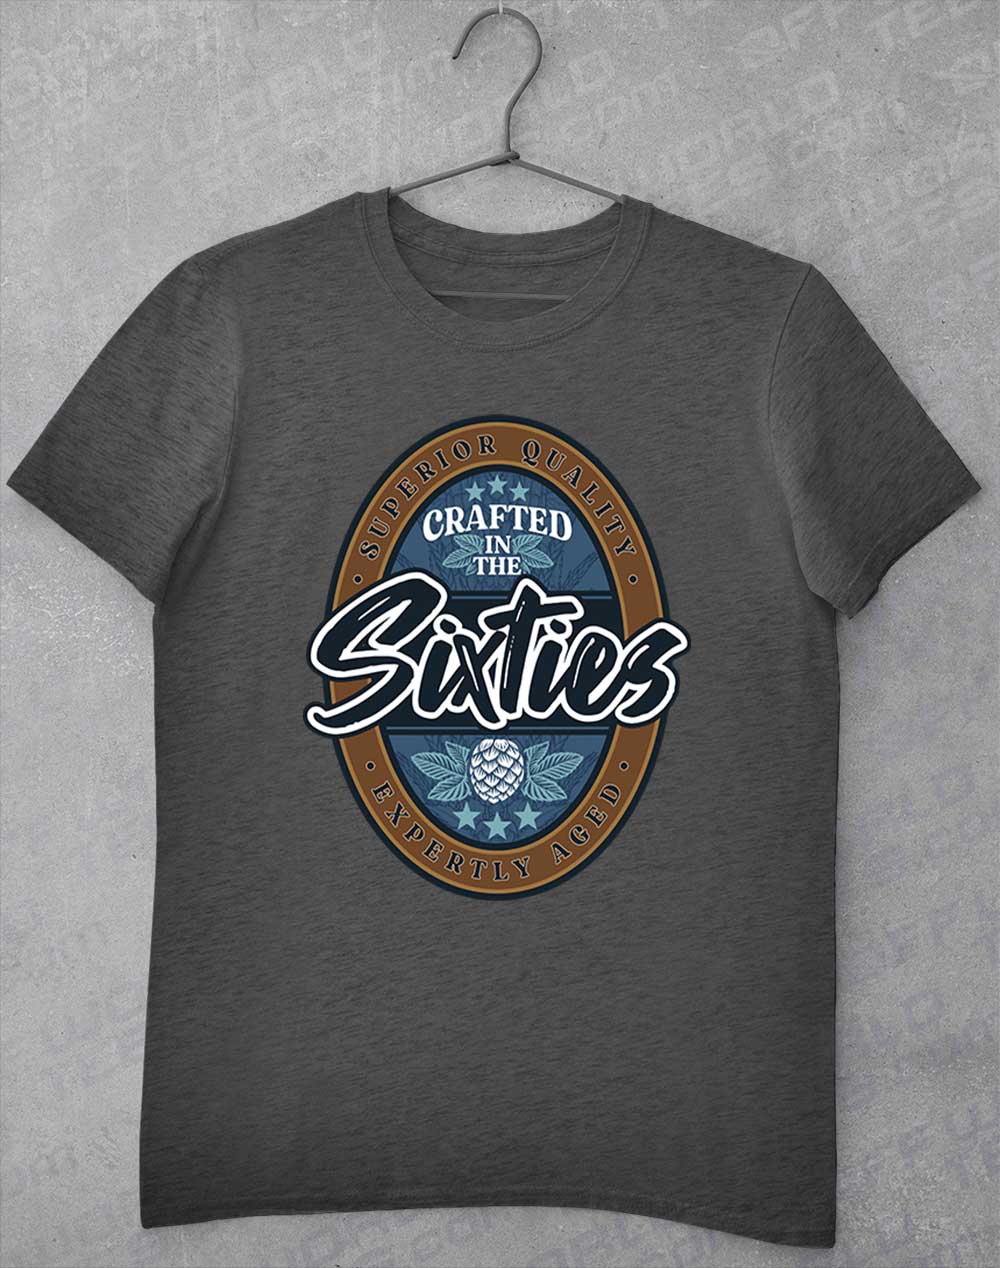 Crafted in the Sixties T-Shirt